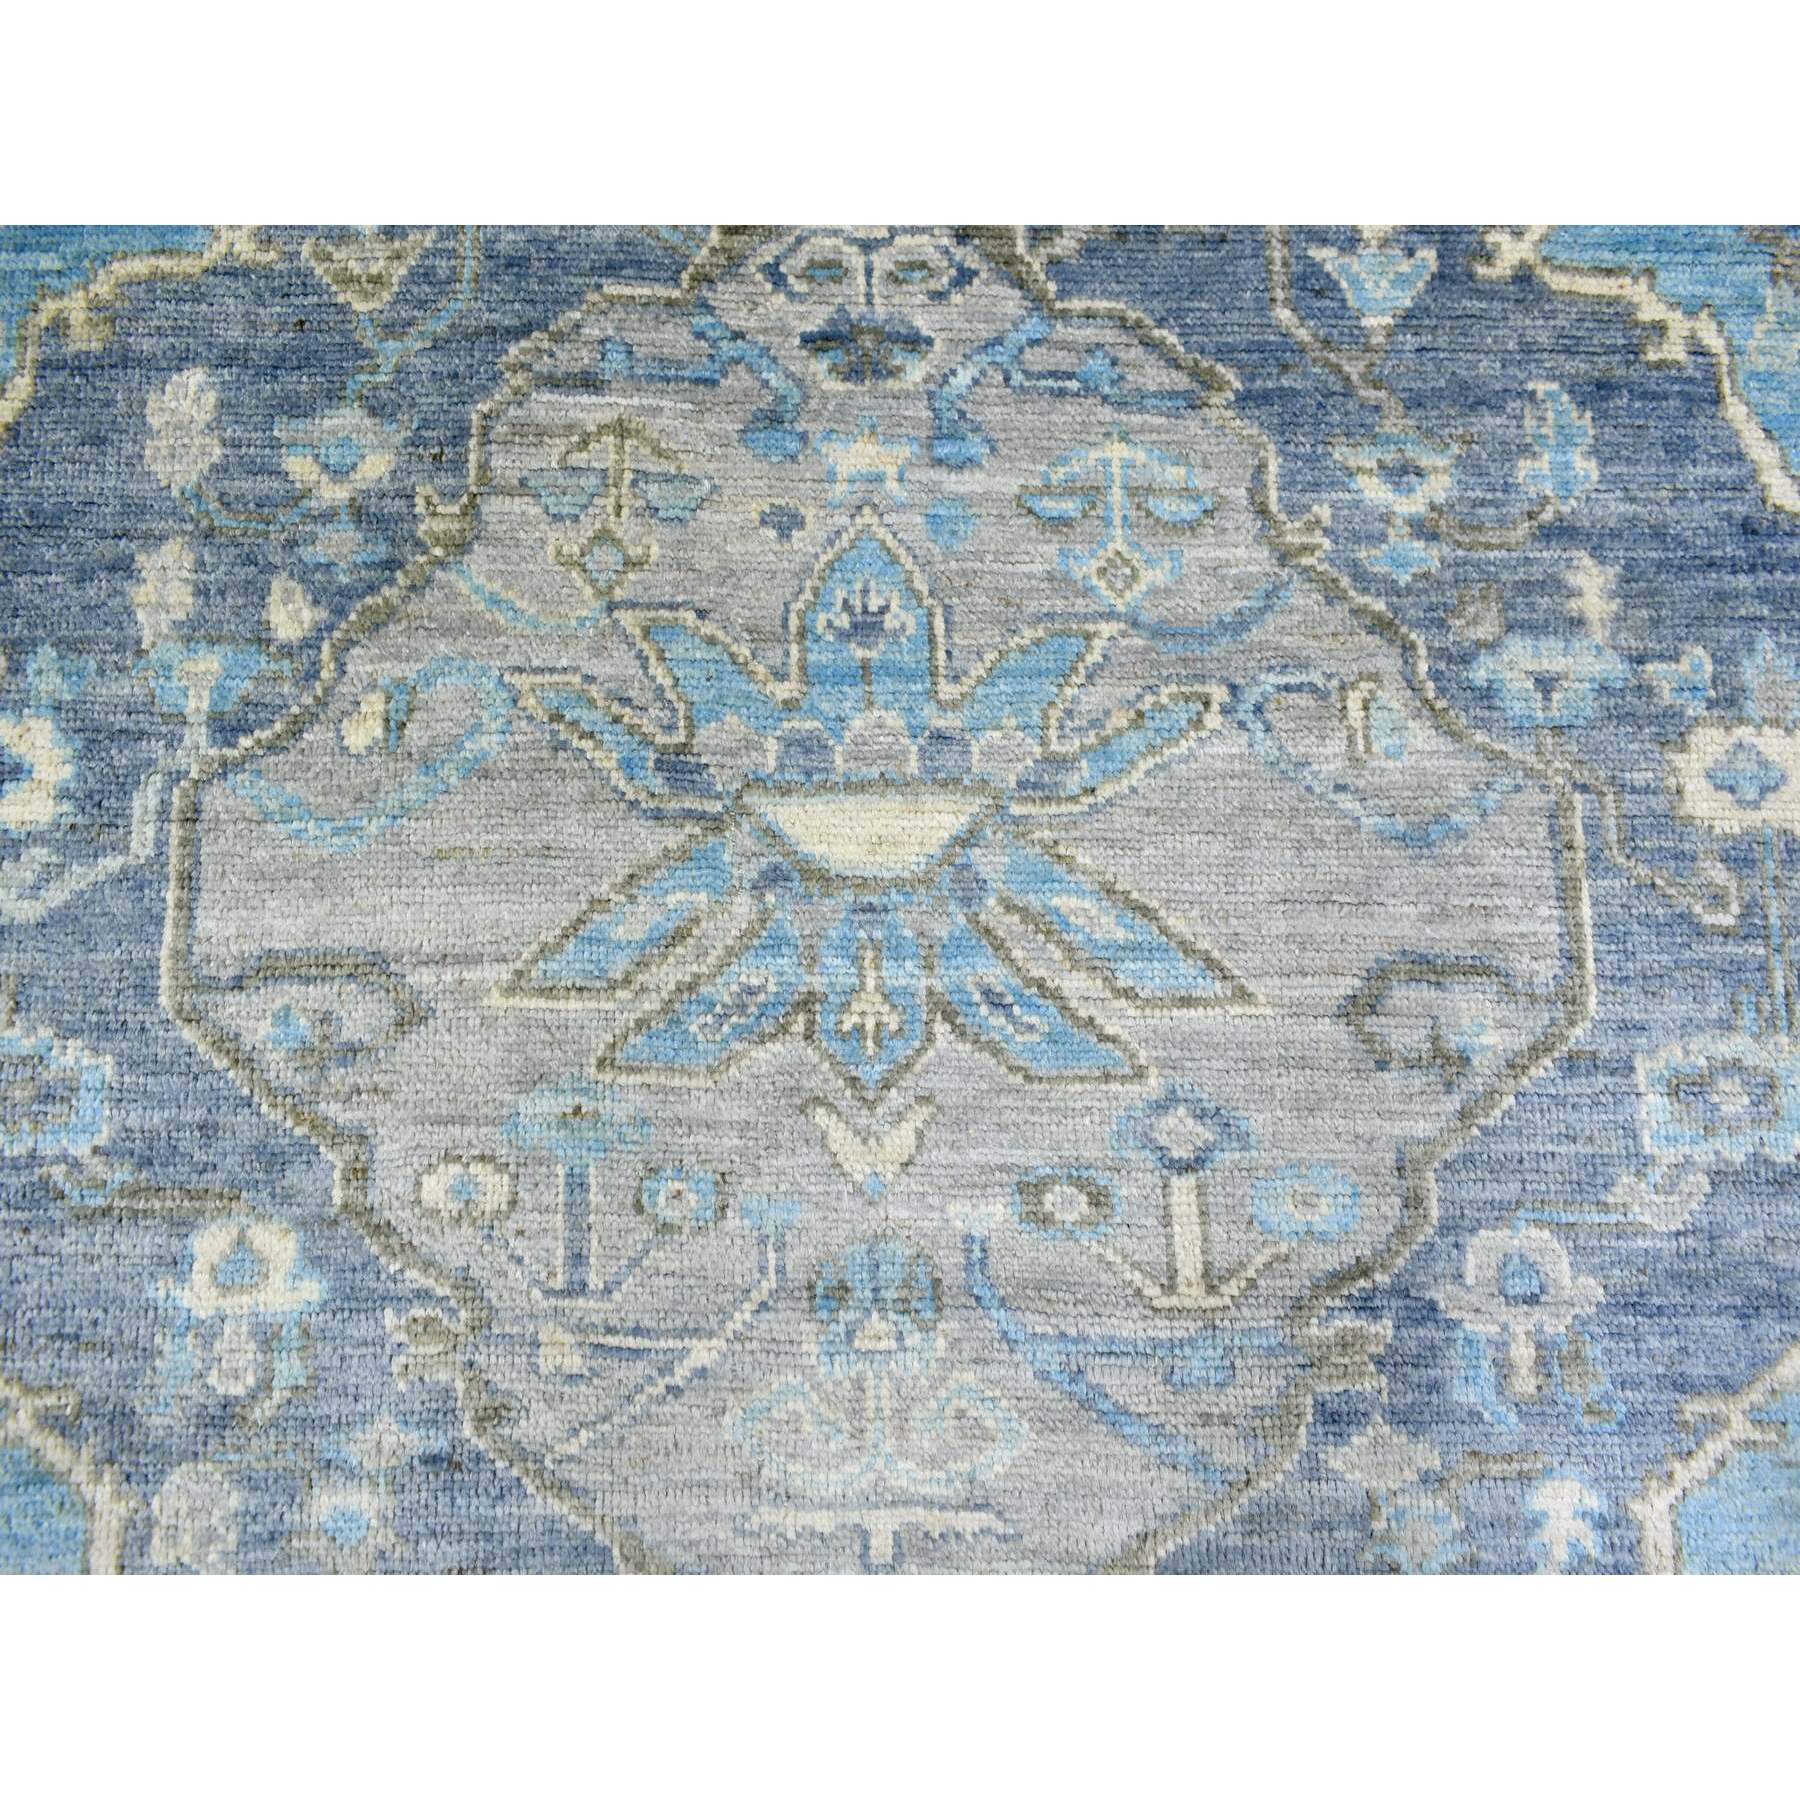 8'x9'6" Light Blue, Hand Woven Anatolian Village Inspired with Large Medallion Design, Natural Dyes Soft Wool, Oriental Rug 